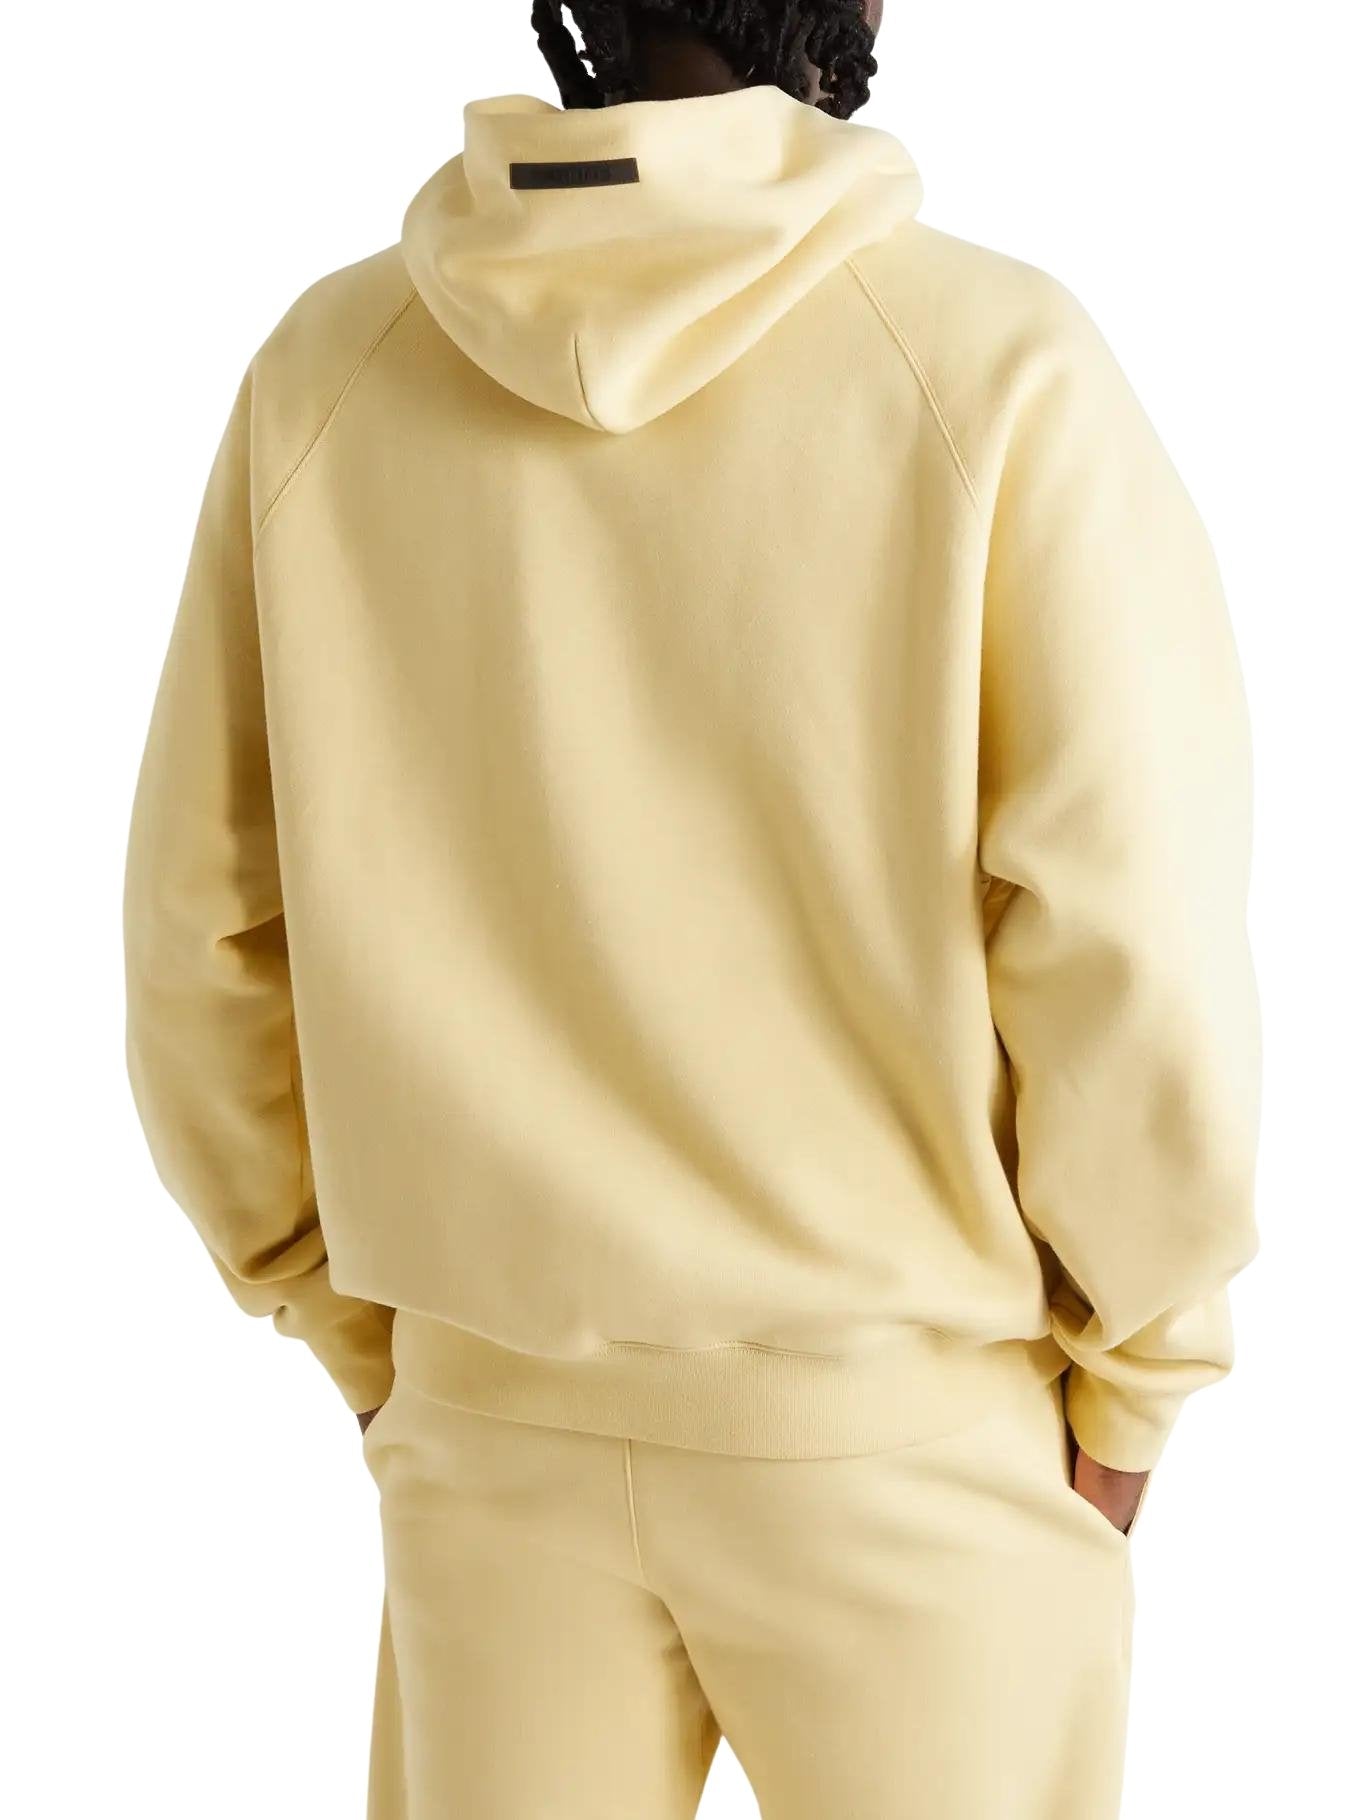 FEAR OF GOD ESSENTIALS CREAM CORE COLLECTION HOODIE - Hype Locker UK